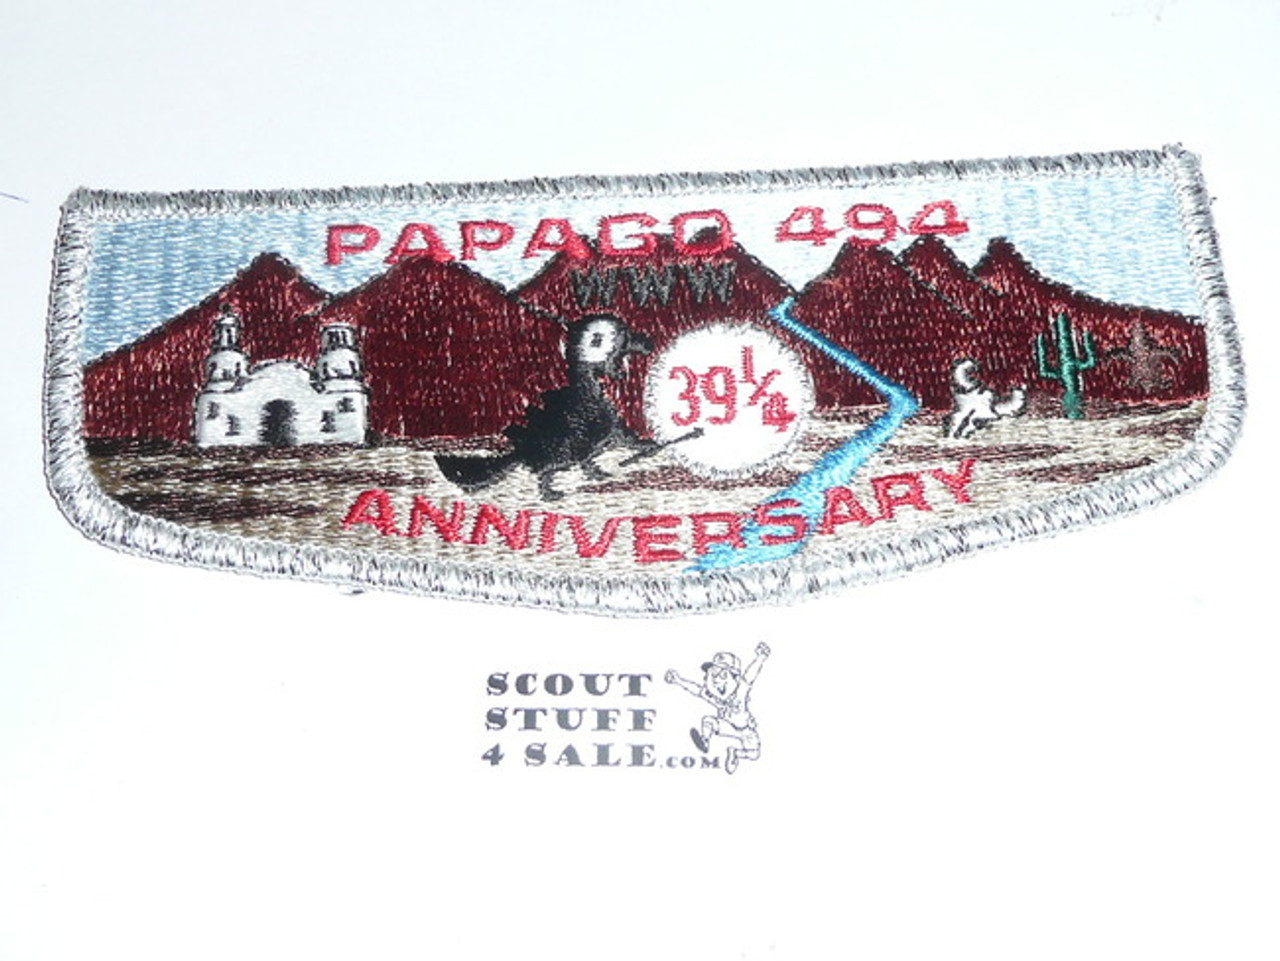 Order of the Arrow Lodge #494 Papago s16 Flap Patch